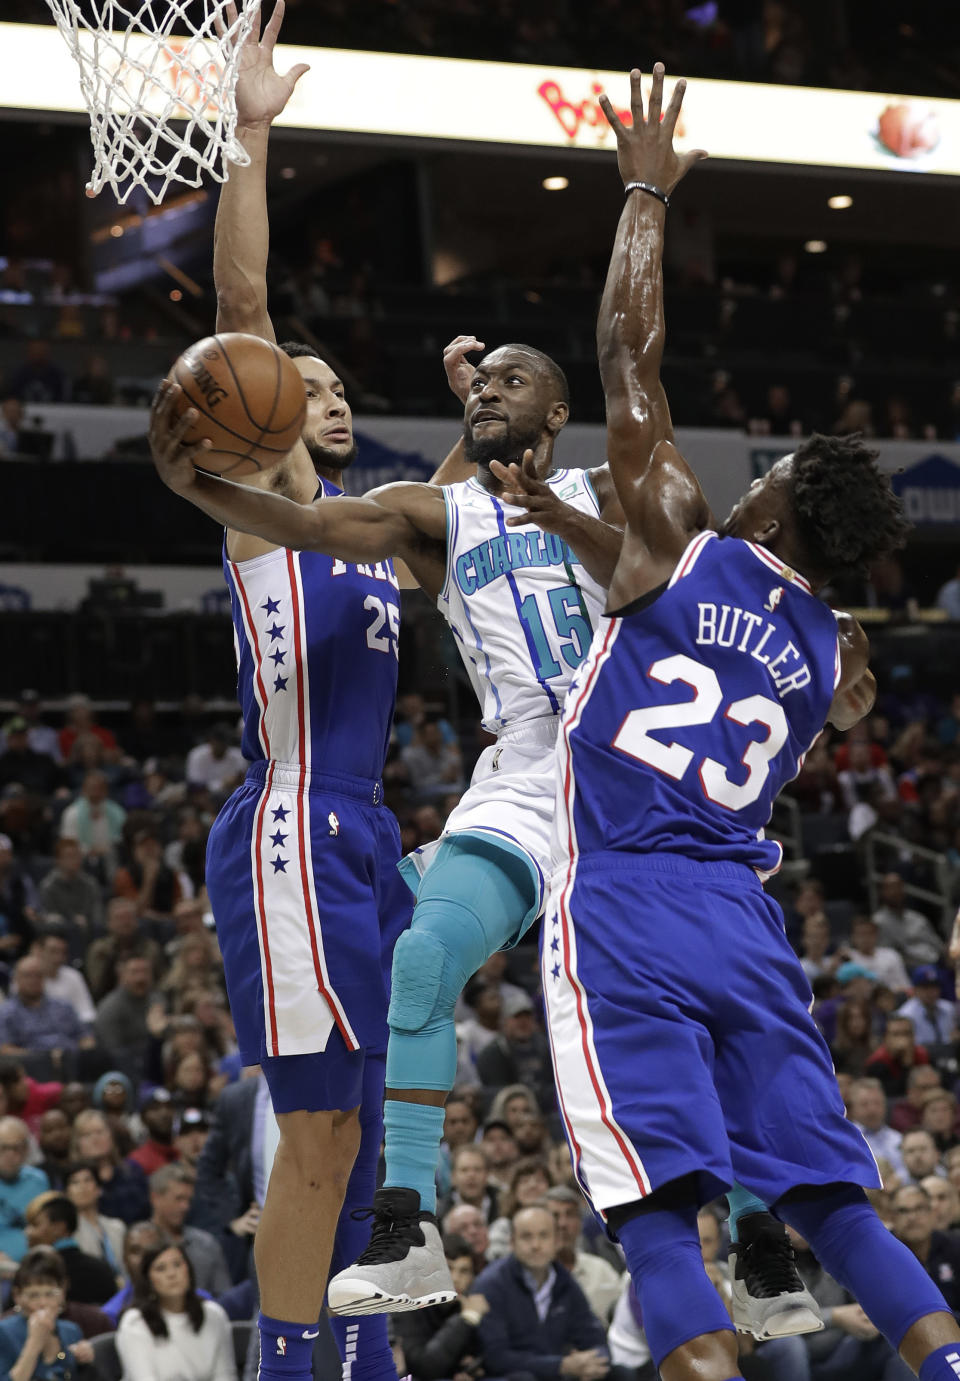 Charlotte Hornets' Kemba Walker (15) drives between Philadelphia 76ers' Jimmy Butler (23) and Ben Simmons (25) during the first half of an NBA basketball game in Charlotte, N.C., Saturday, Nov. 17, 2018. (AP Photo/Chuck Burton)